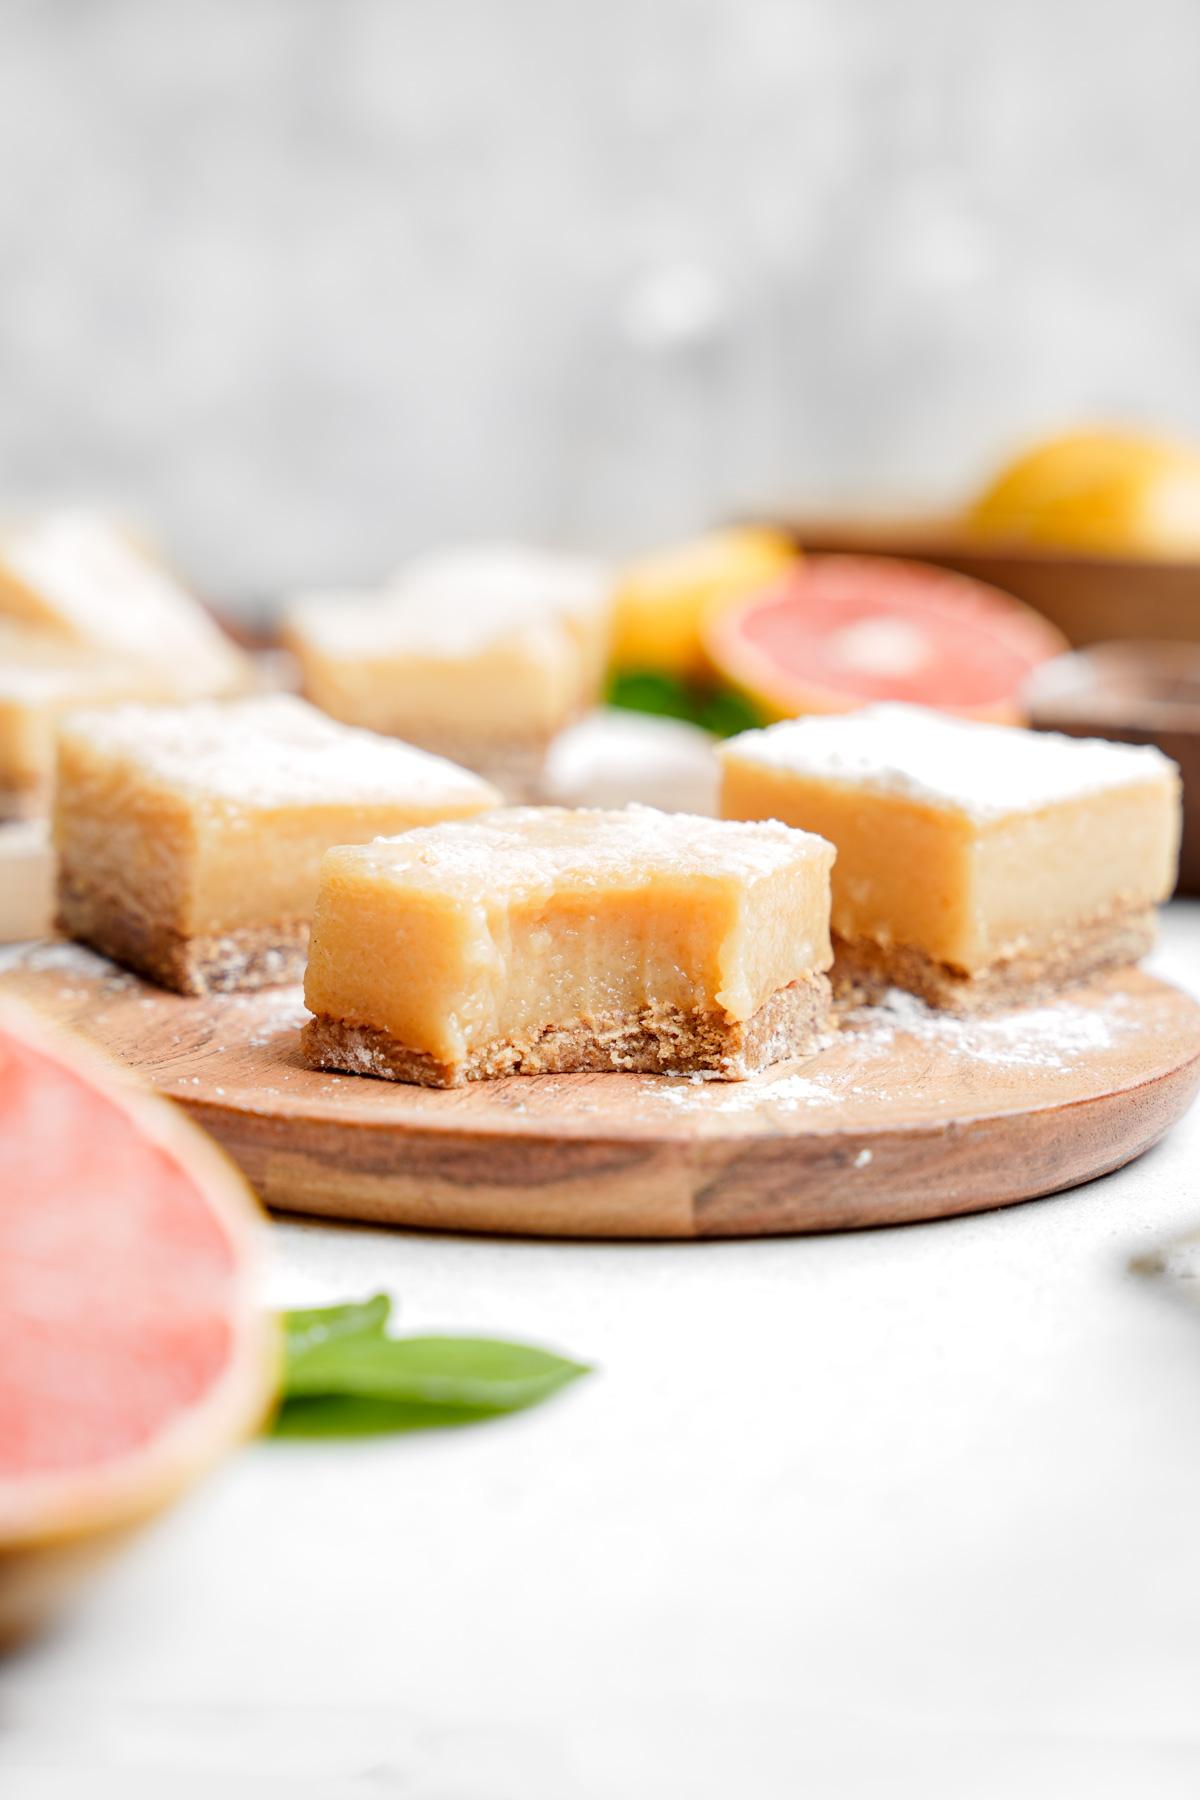 the grapefruit bars with a bite taken out of one to